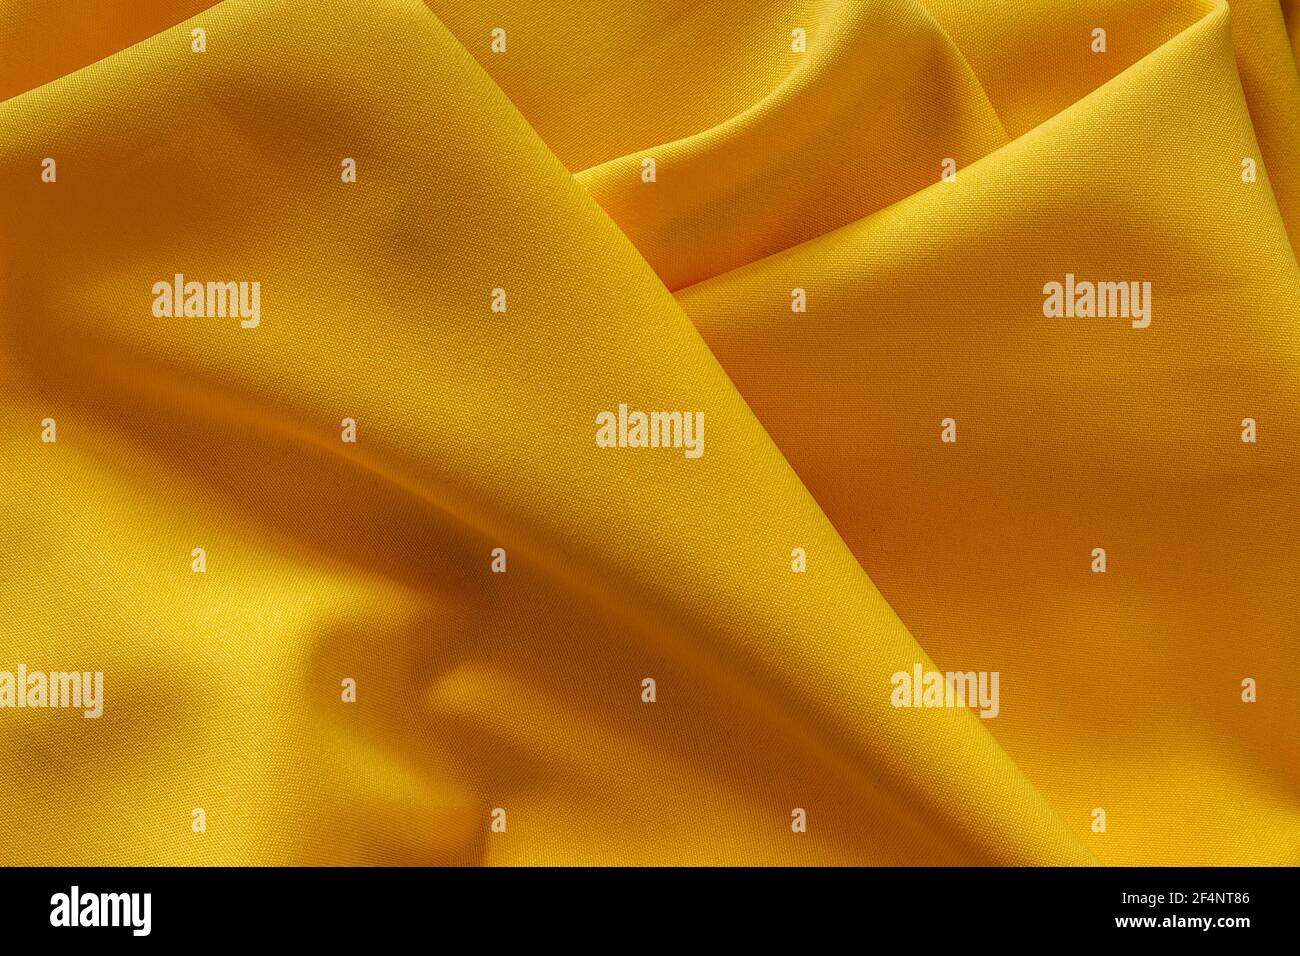 Yellow fabric texture.Spring color.Abstract yellow background. Smooth elegant golden textile. Trendy Color of the Year 2021. Color of happiness, glory Stock Photo